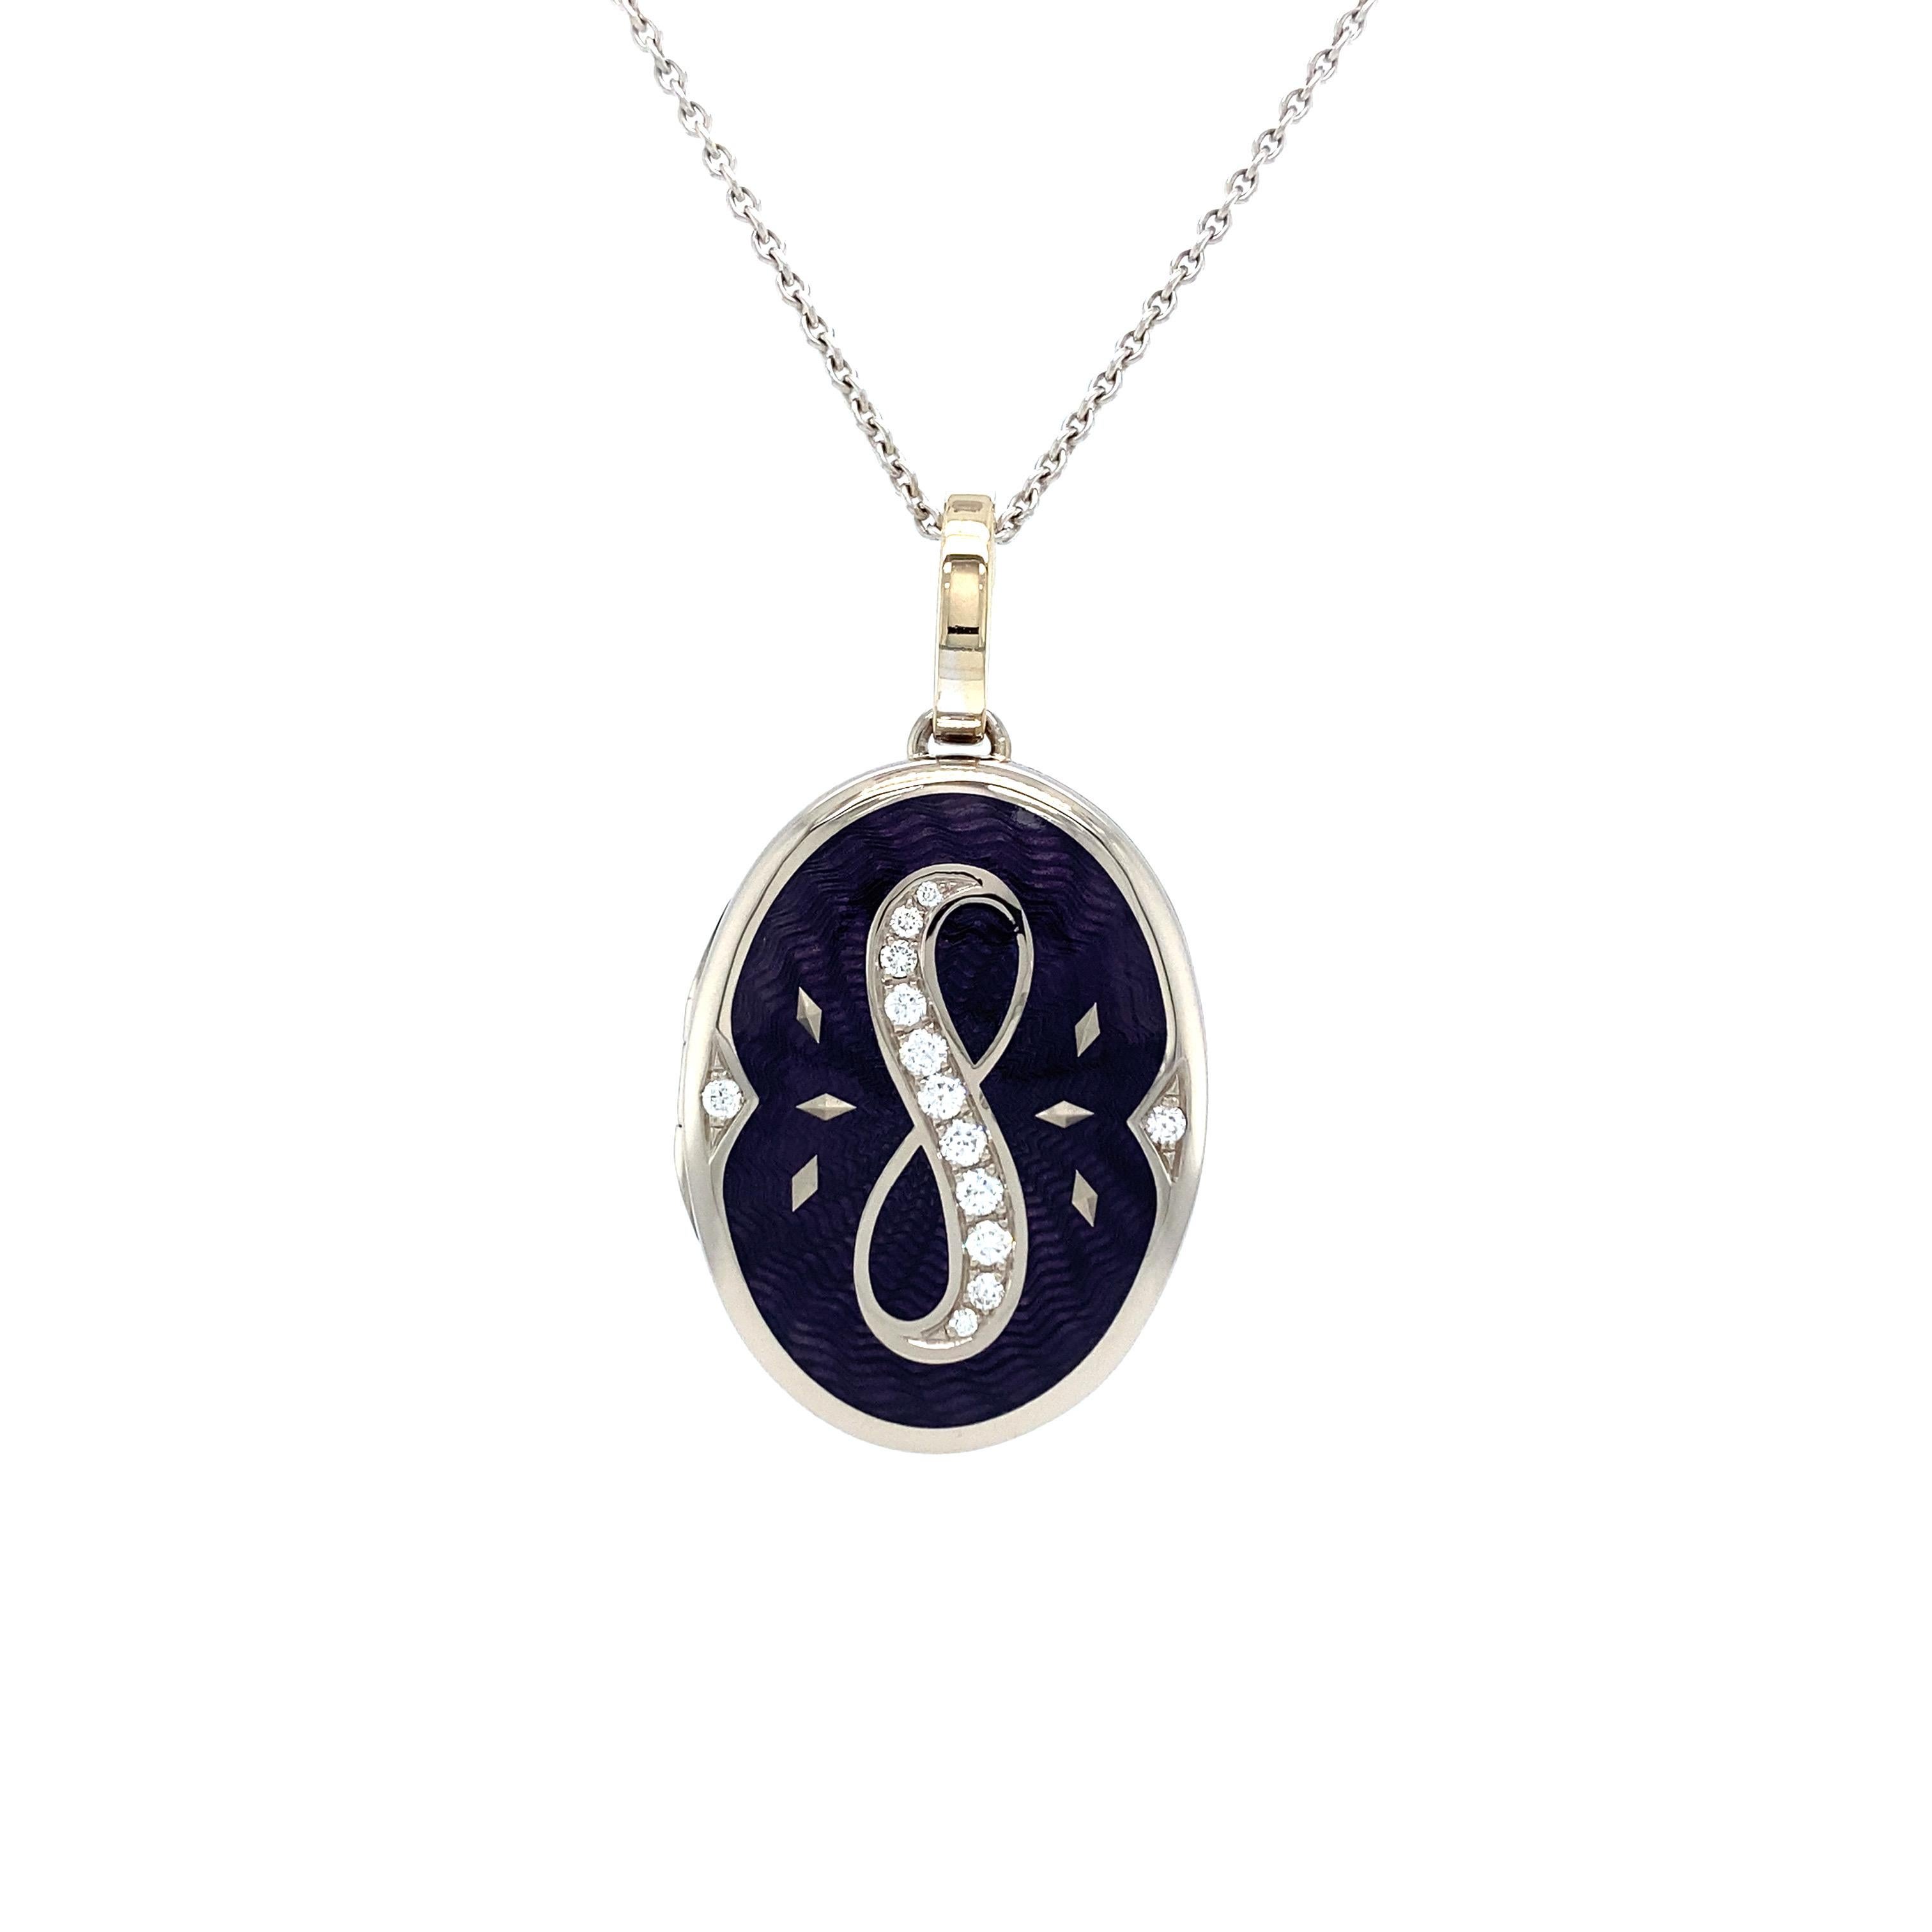 Victor Mayer customizable oval locket pendant with infinity symbol, 18k white gold, Victoria Collection, translucent lilac vitreous enamel, guilloche, paillons, 13 diamonds, total 0.22 ct, G VS brilliant cut, measurements app. 17.0 mm x 27.0